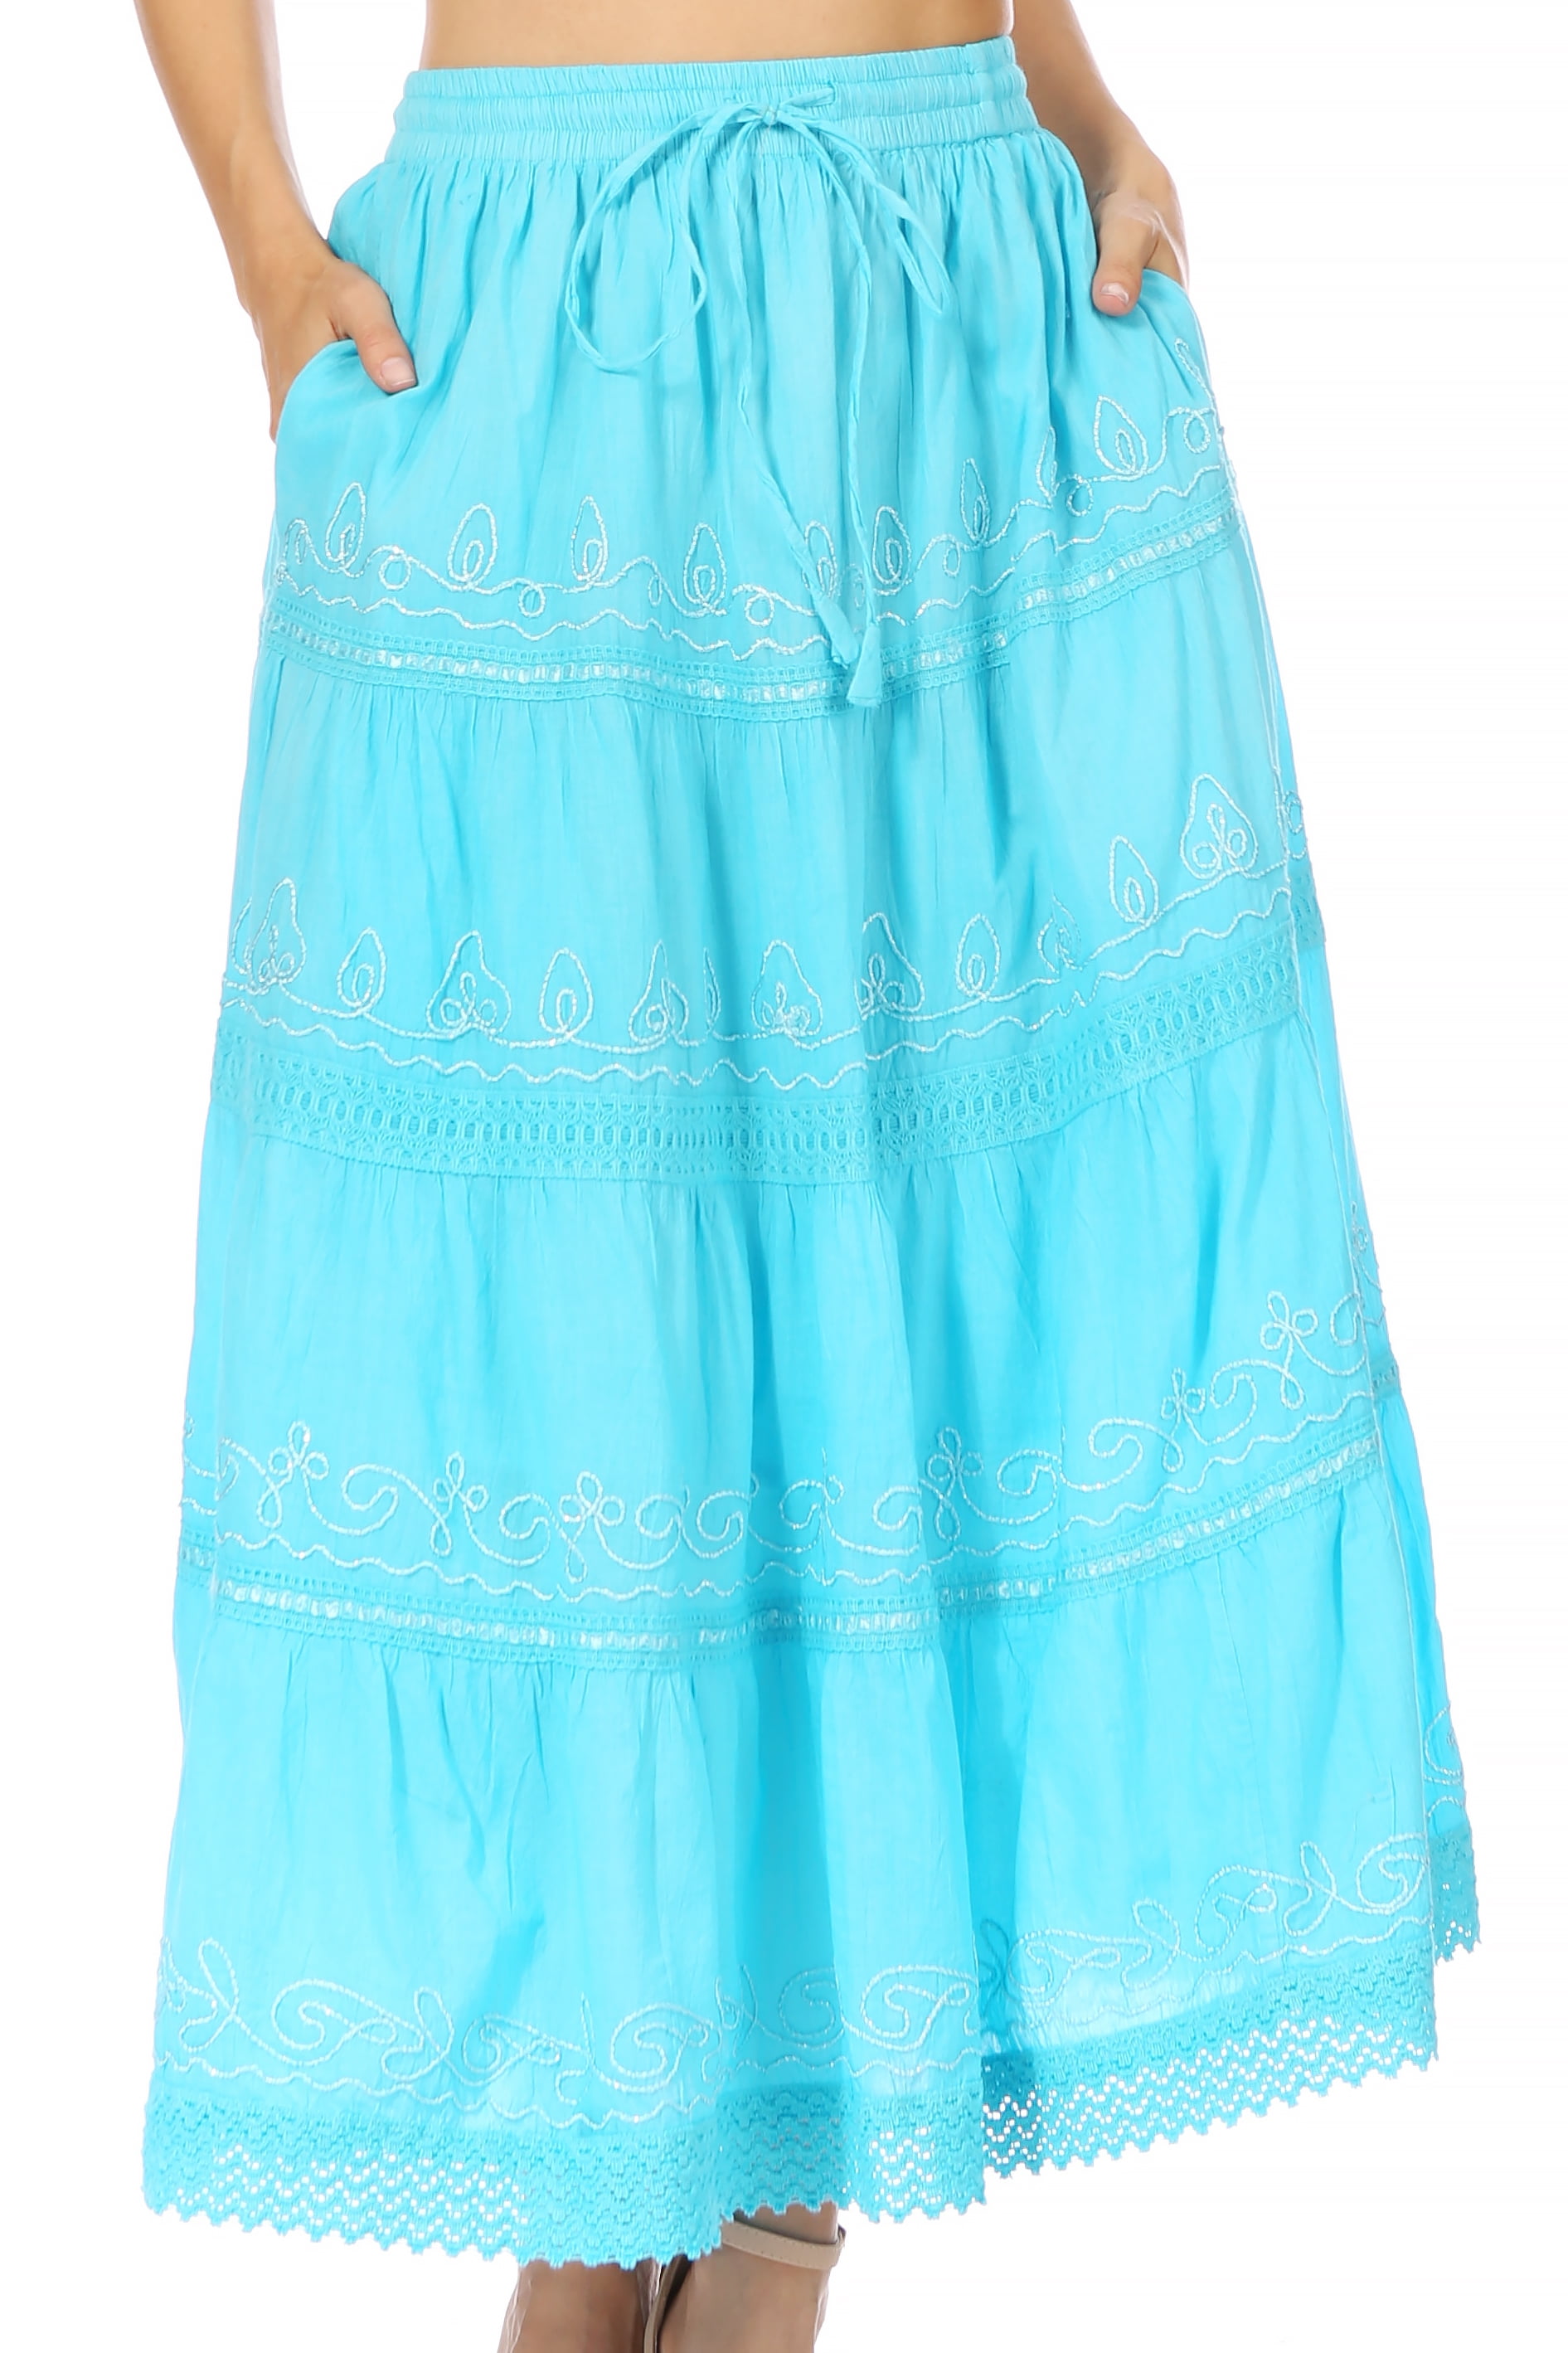 Sakkas Solid Embroidered Crochet Lace Trim Gypsy Bohemian Mid Length Cotton  Skirt - Turquoise - One Size - Walmart.com